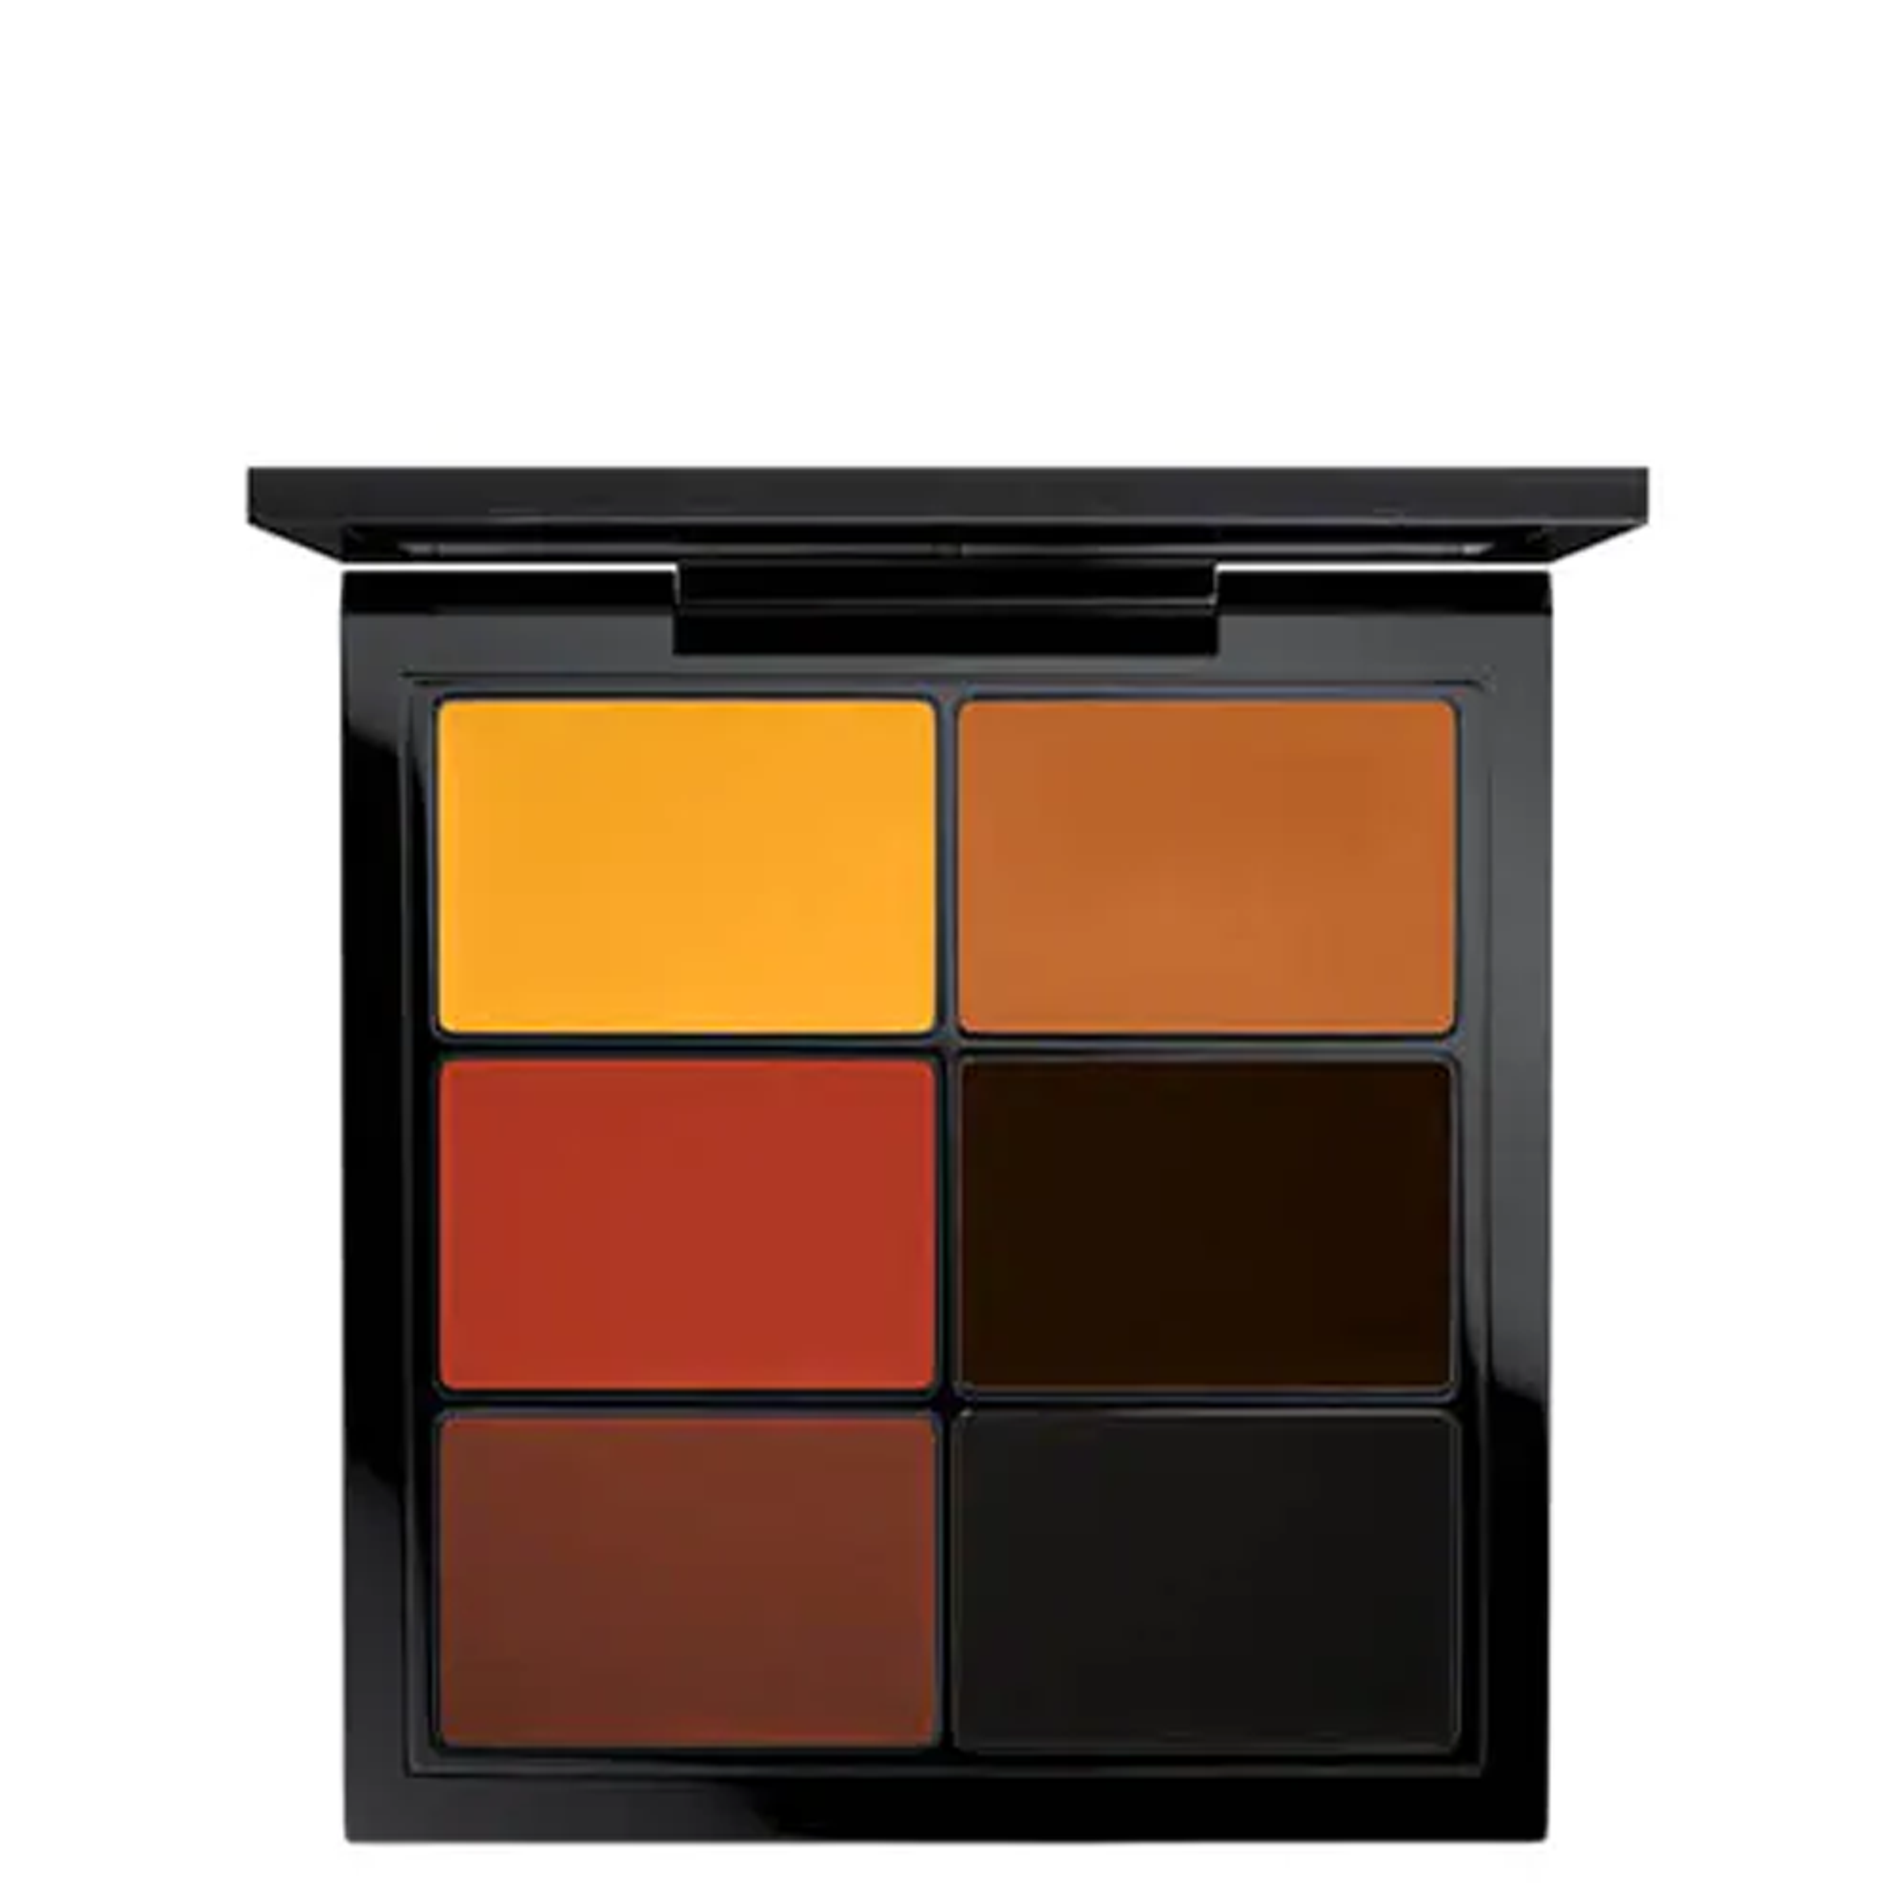 bang-che-khuyet-diem-mac-studio-conceal-and-correct-palette-6g-11